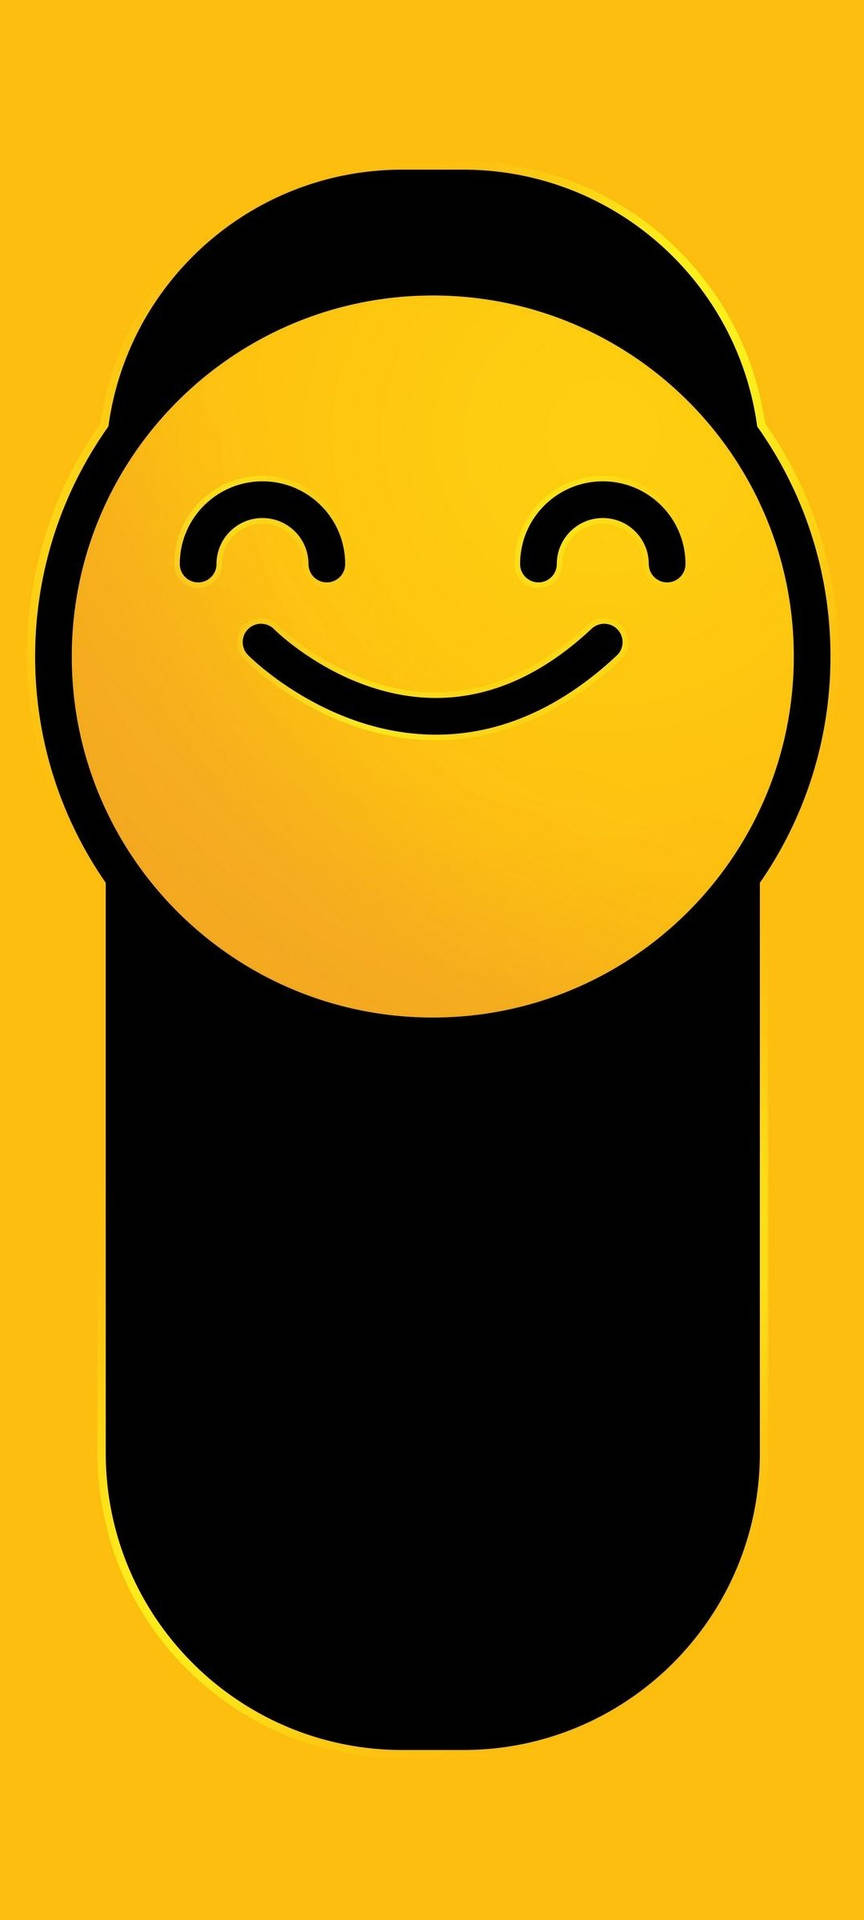 Smiley Face Black And Yellow Wallpaper